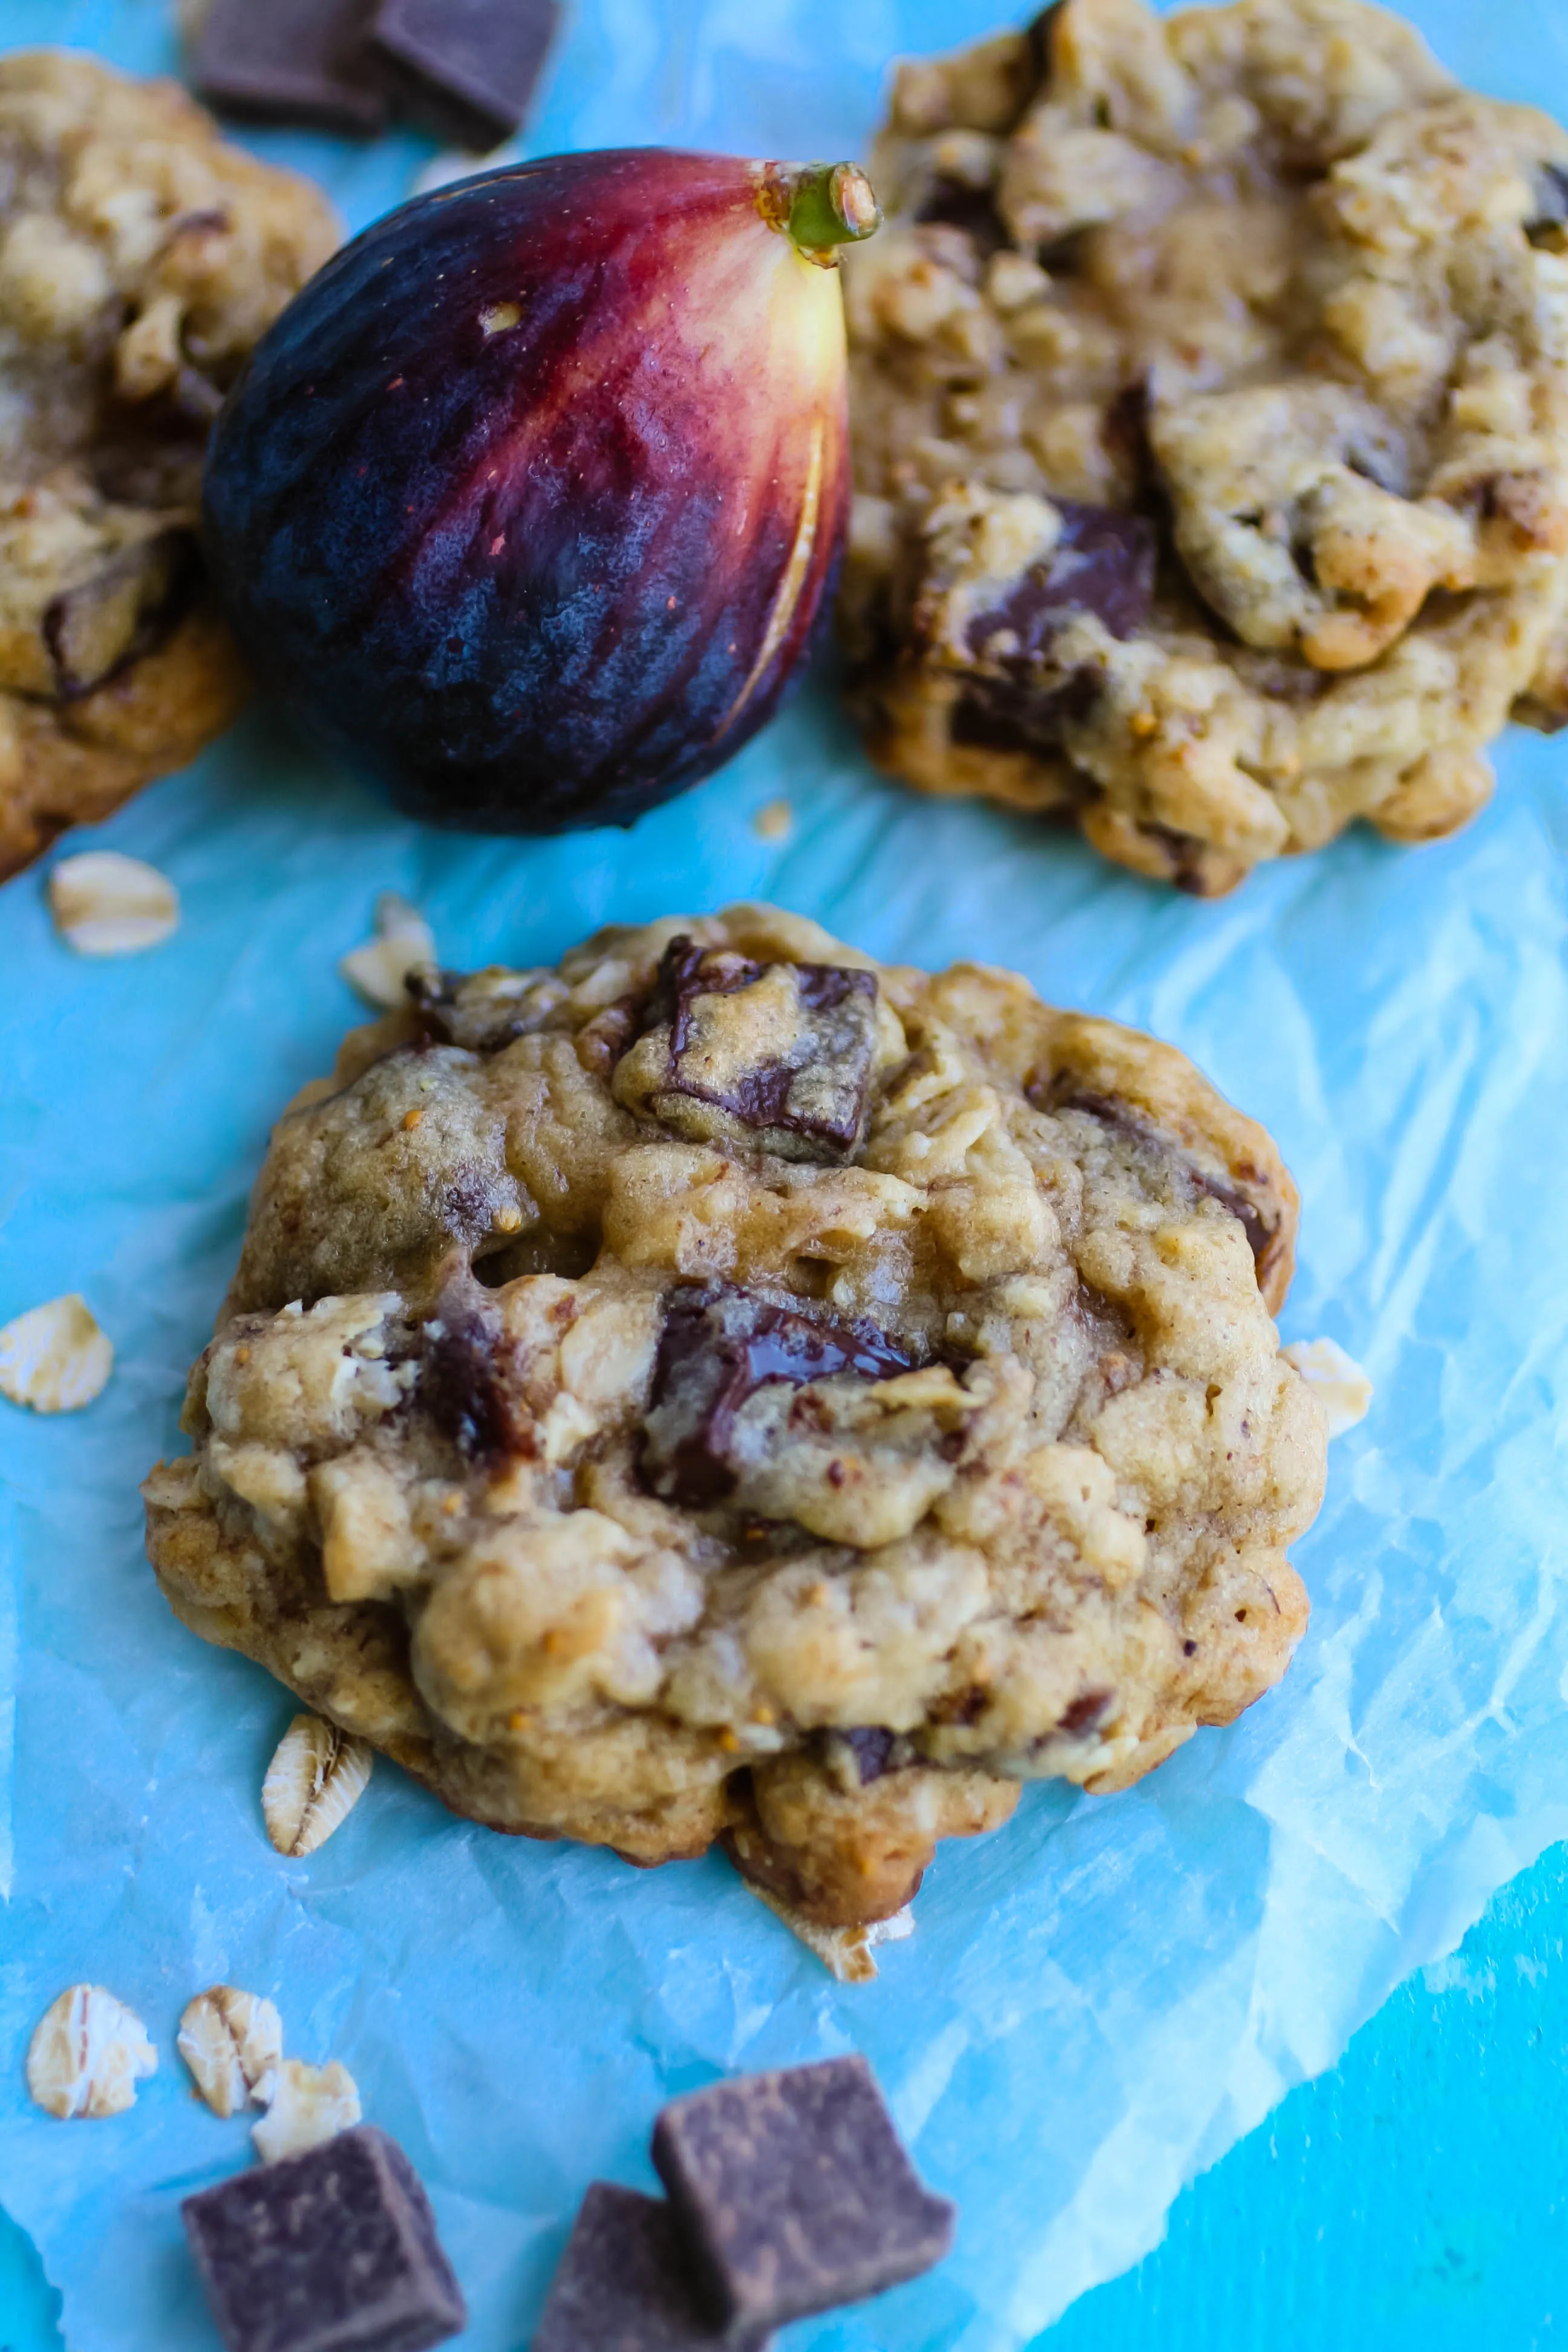 Oatmeal fig cookies with dark chocolate chunks are awesome cookies everyone will love. Oatmeal fig cookies with dark chocolate chunks are loaded with great ingredients for a hearty cookie.